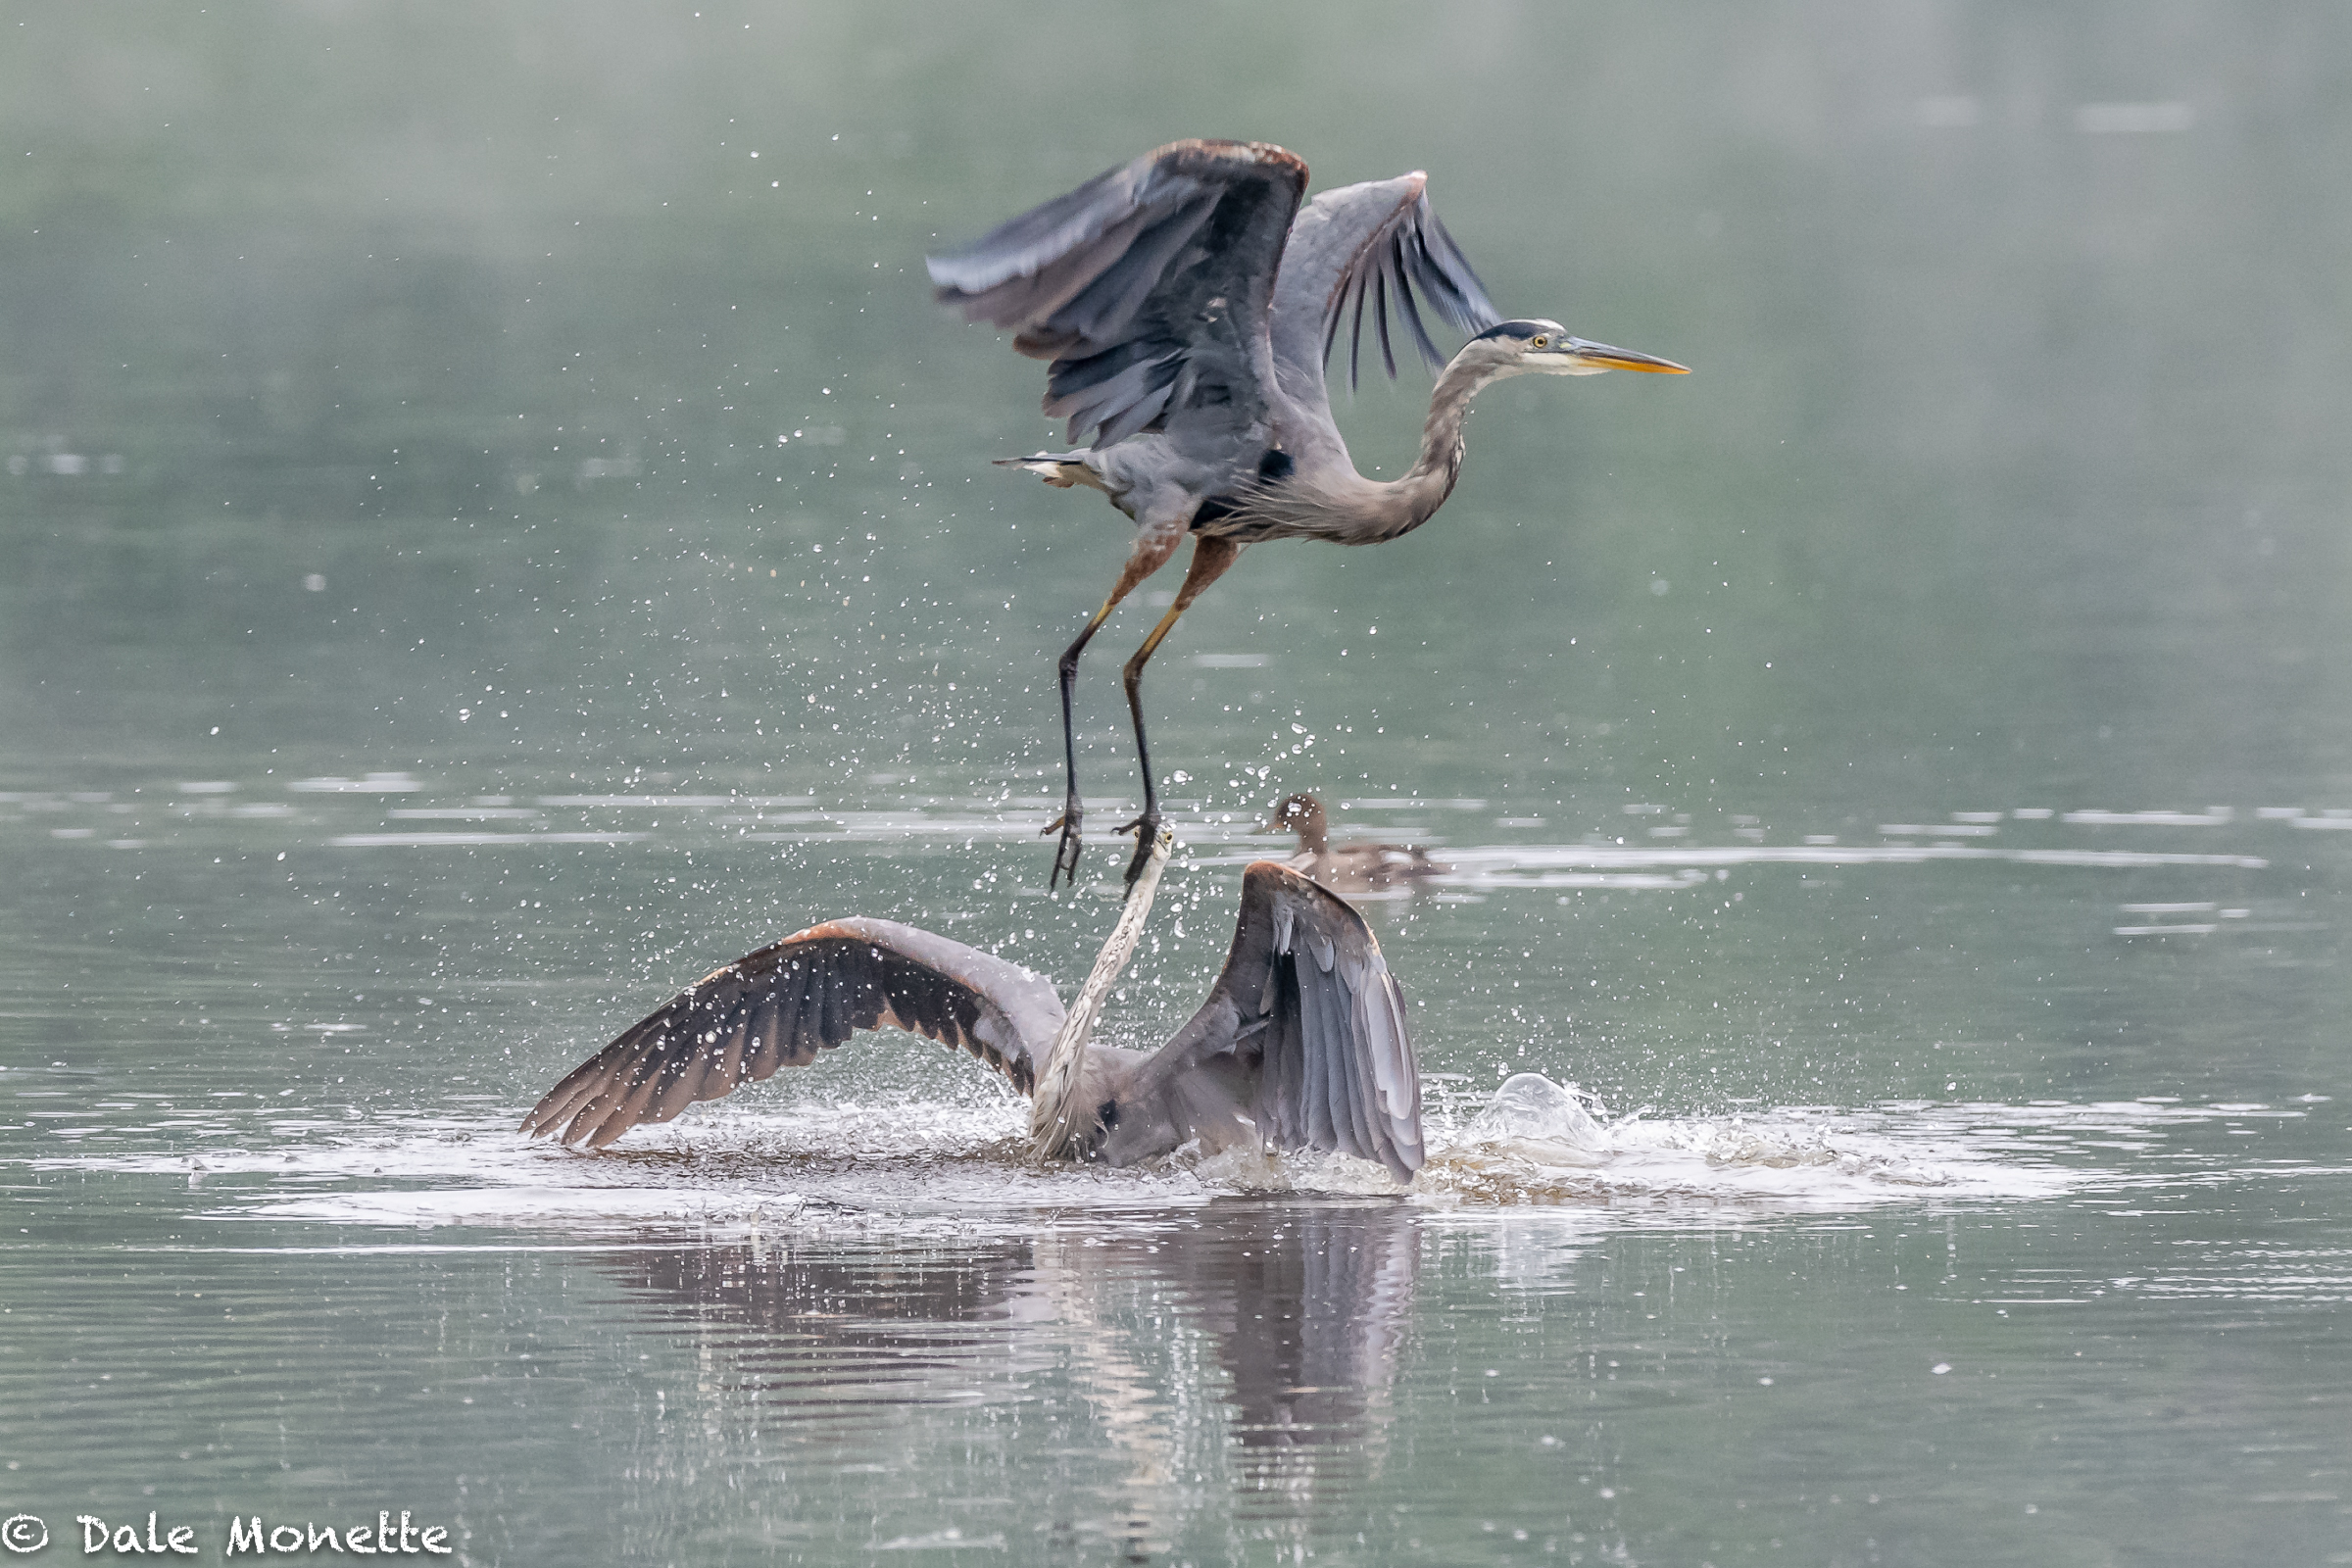   Photobomb !  Two great blue herons having a fishing area argument!    